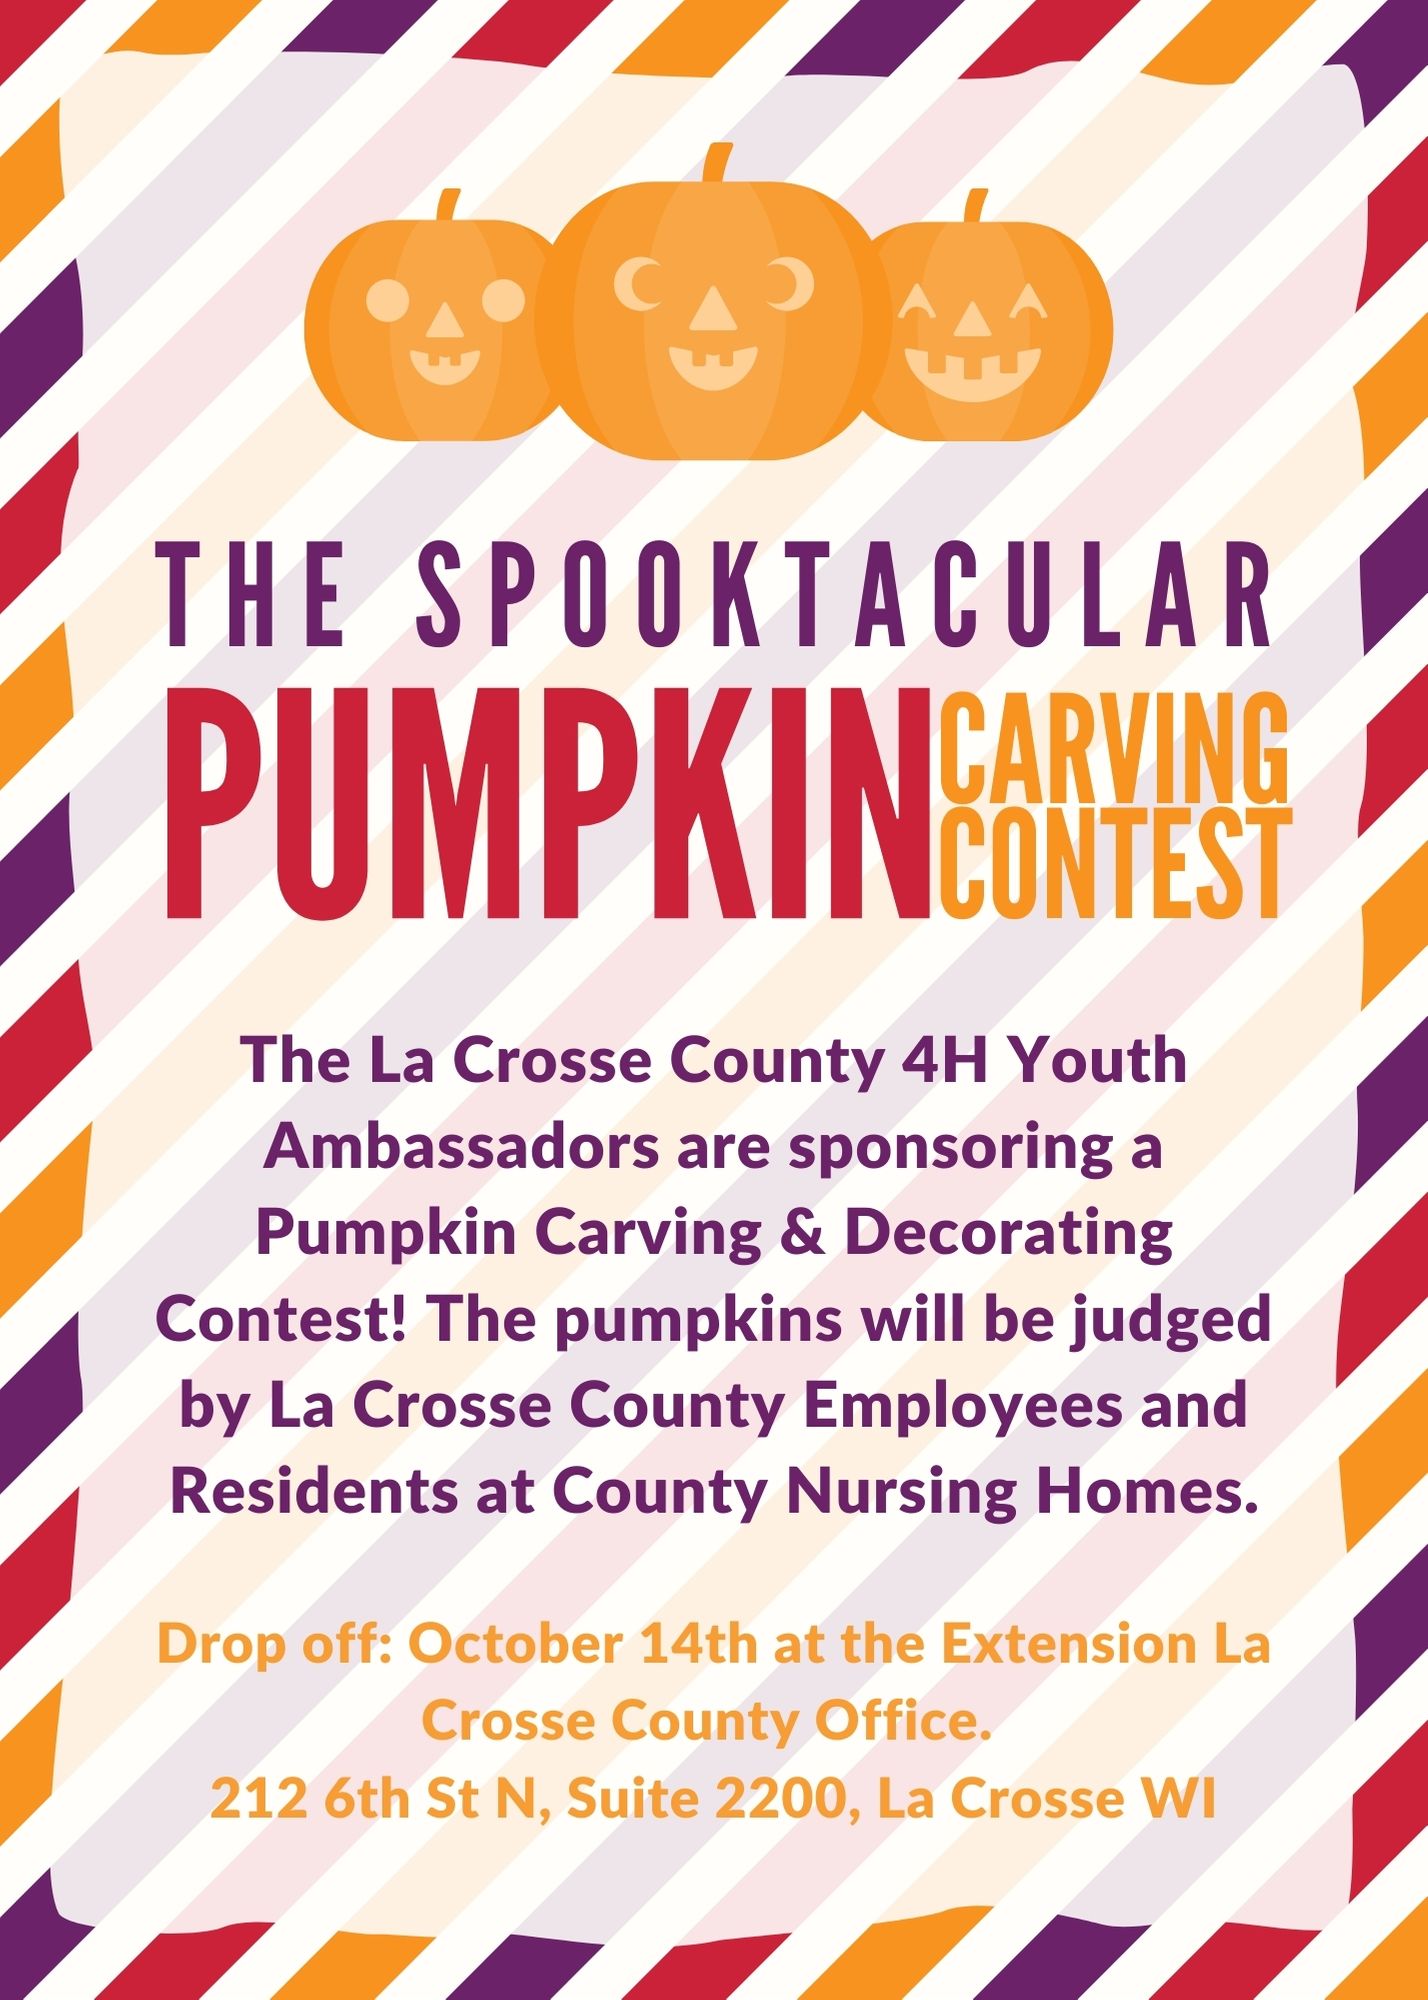 4H Pumpkin Carving and Decorating Contest Extension La Crosse County